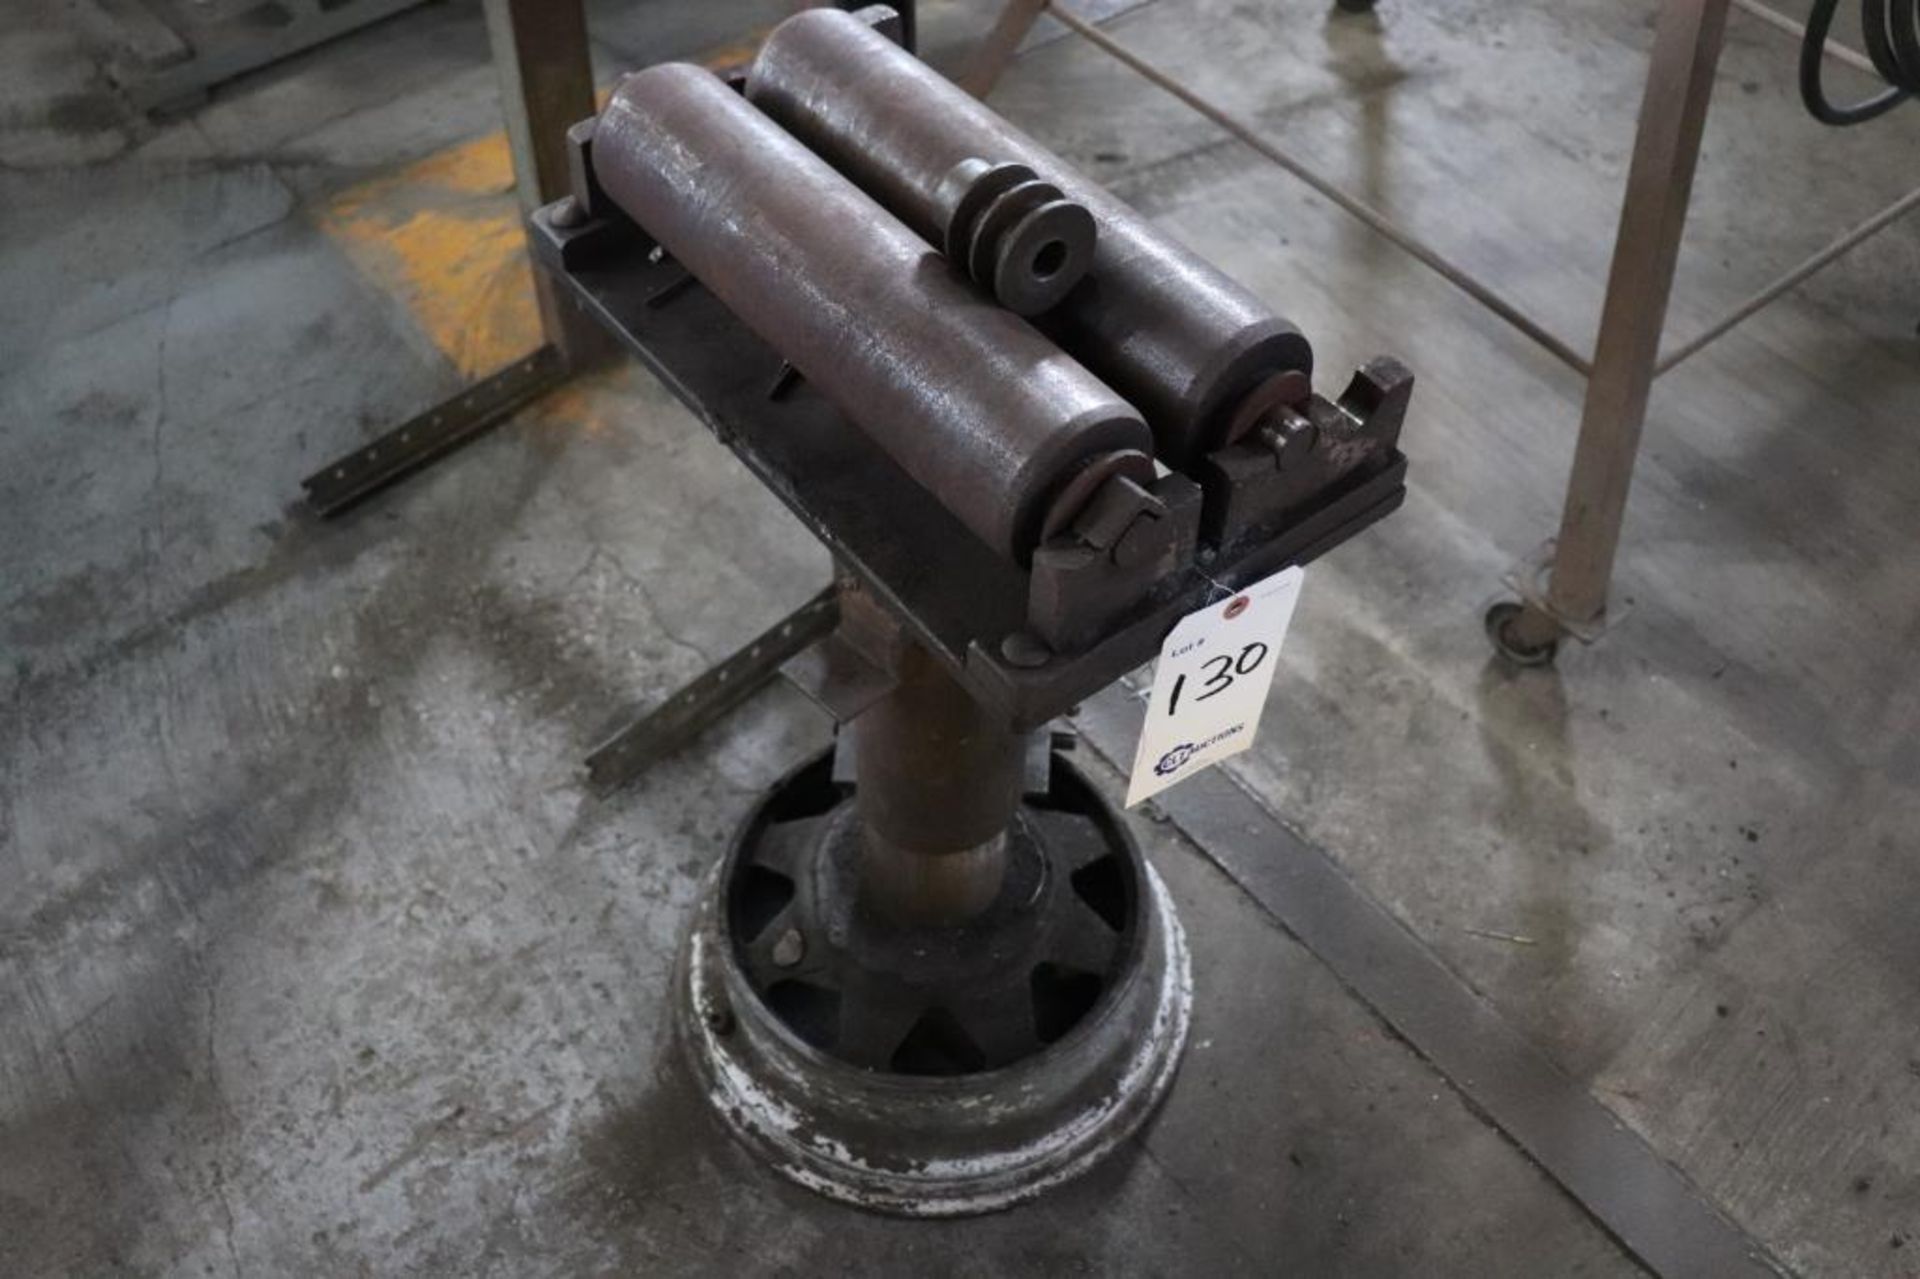 Welding positioner w/ lot 130 stock stand - Image 5 of 5